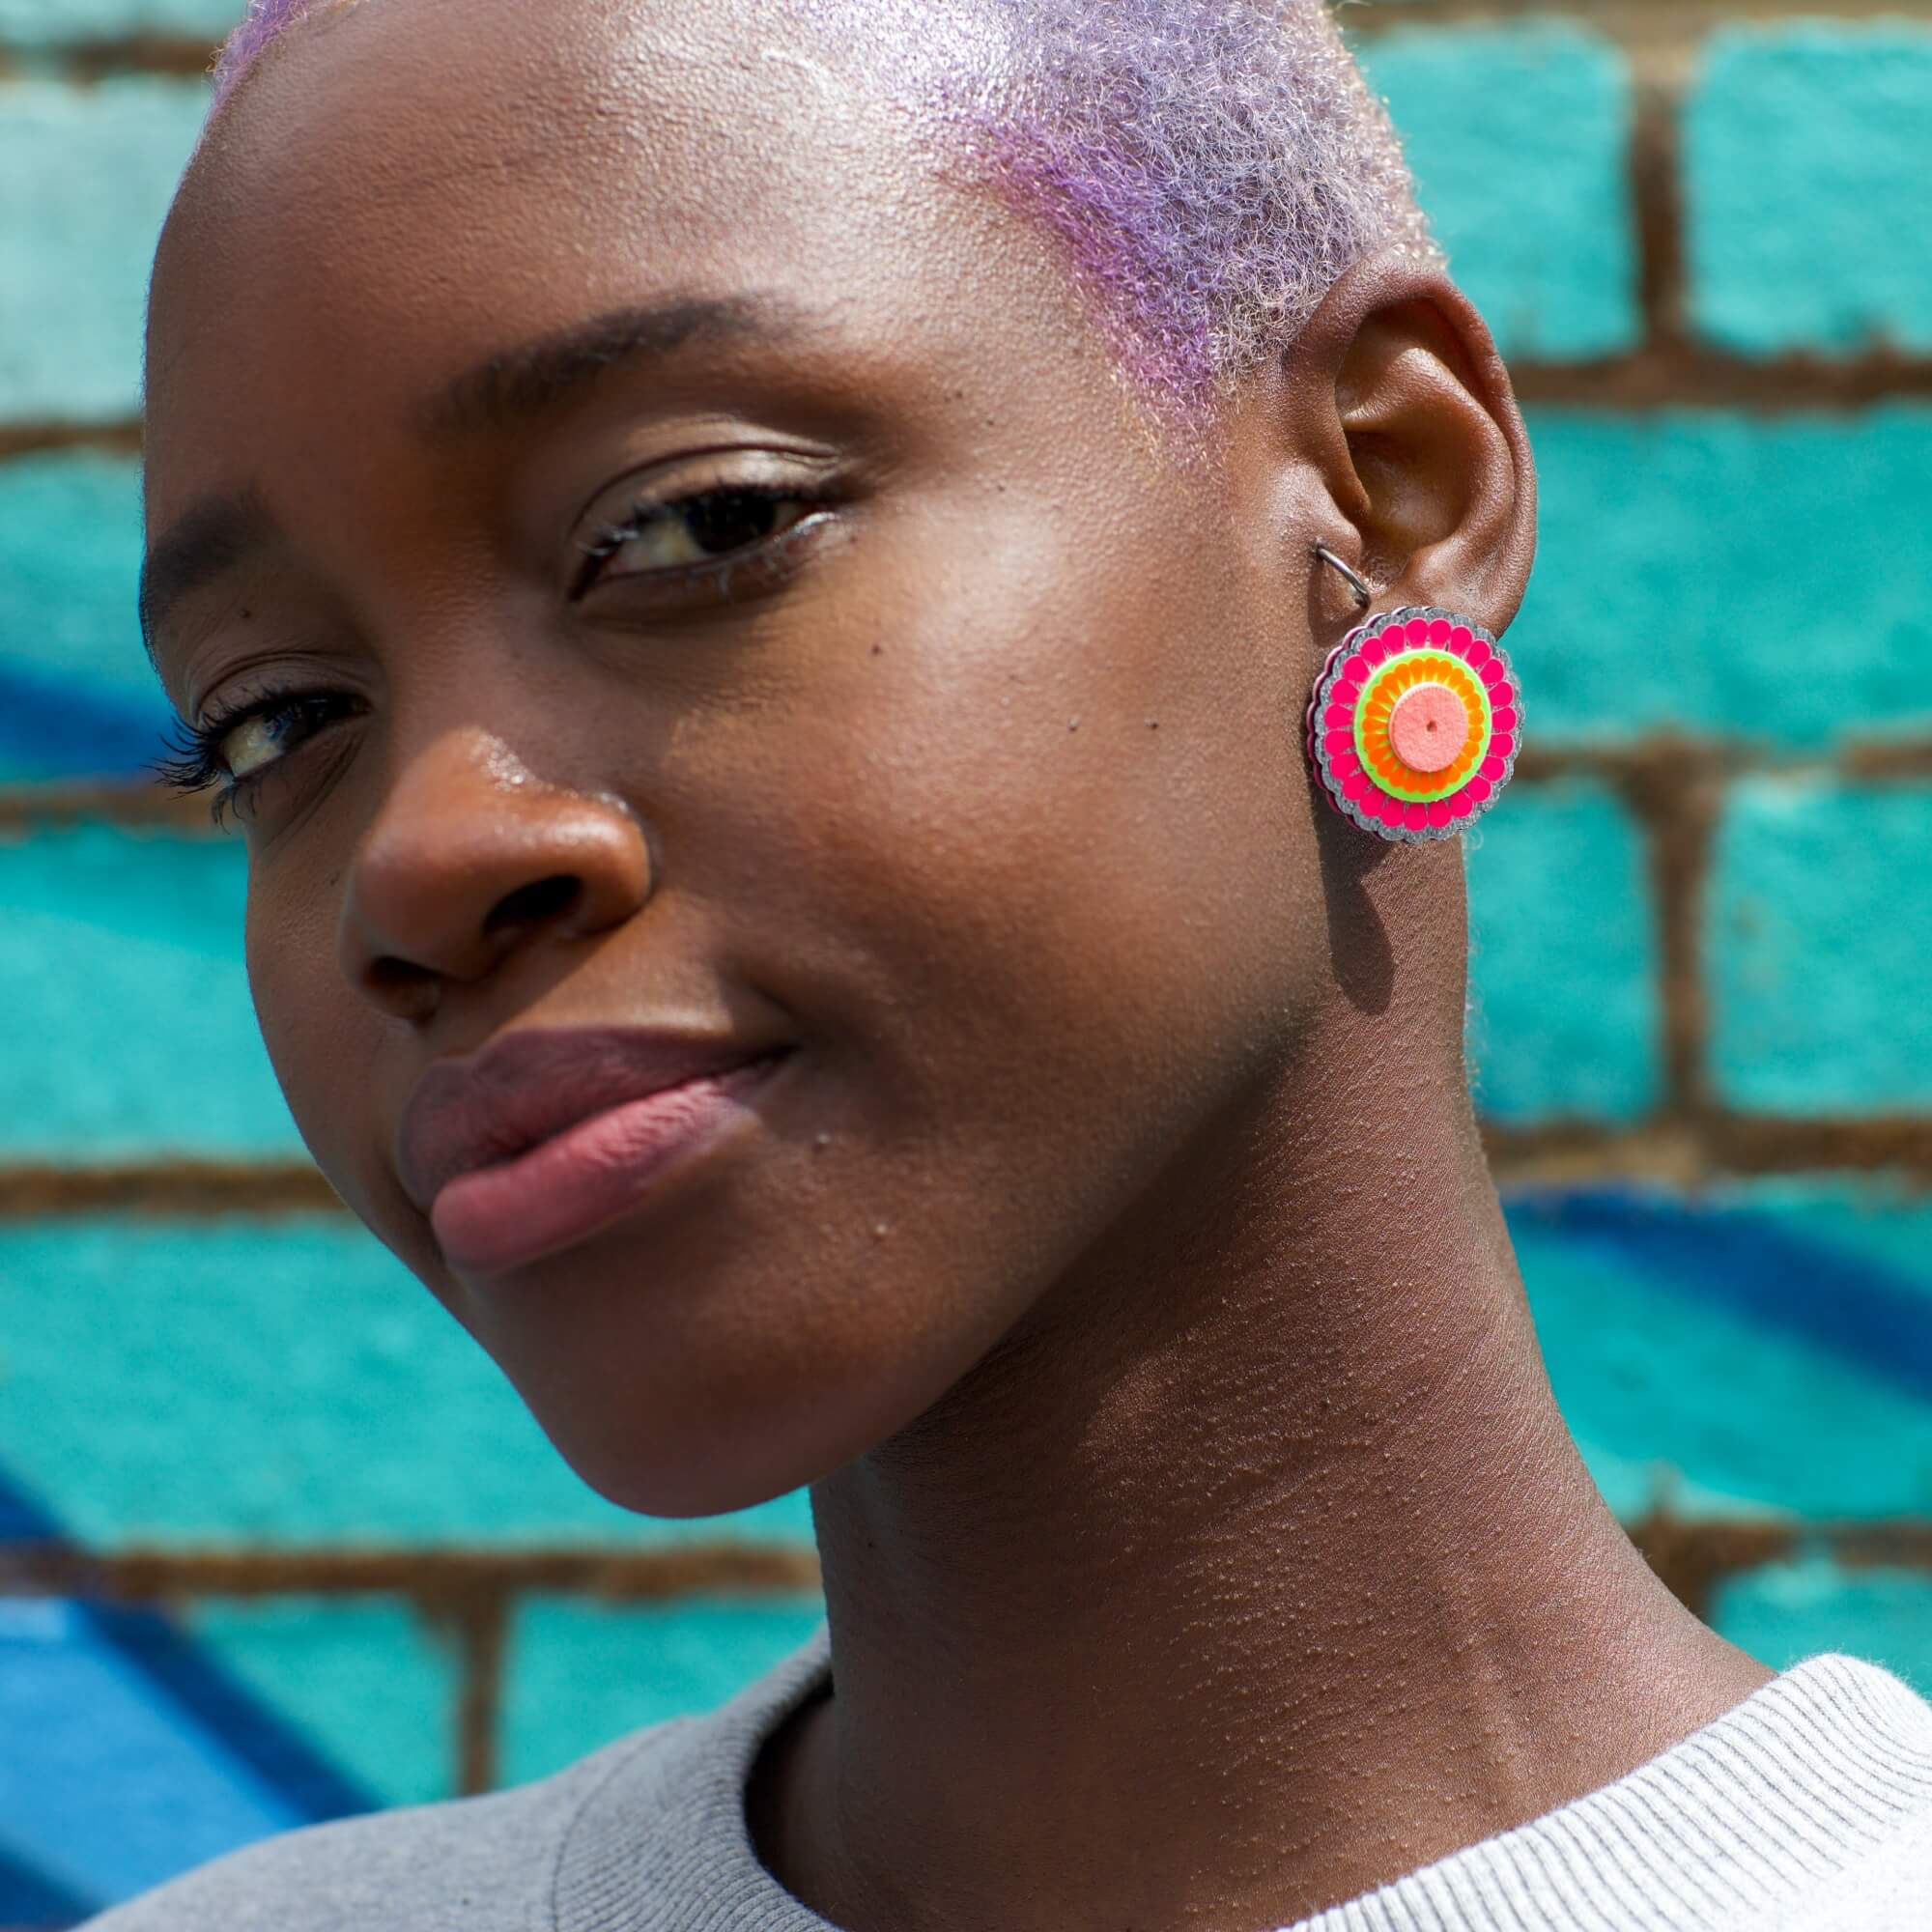 A young black woman with very short lilac hair is gazing into the camera. she is wearing a pair of large circular stud earrings and standing against a bright turquoise brick wall